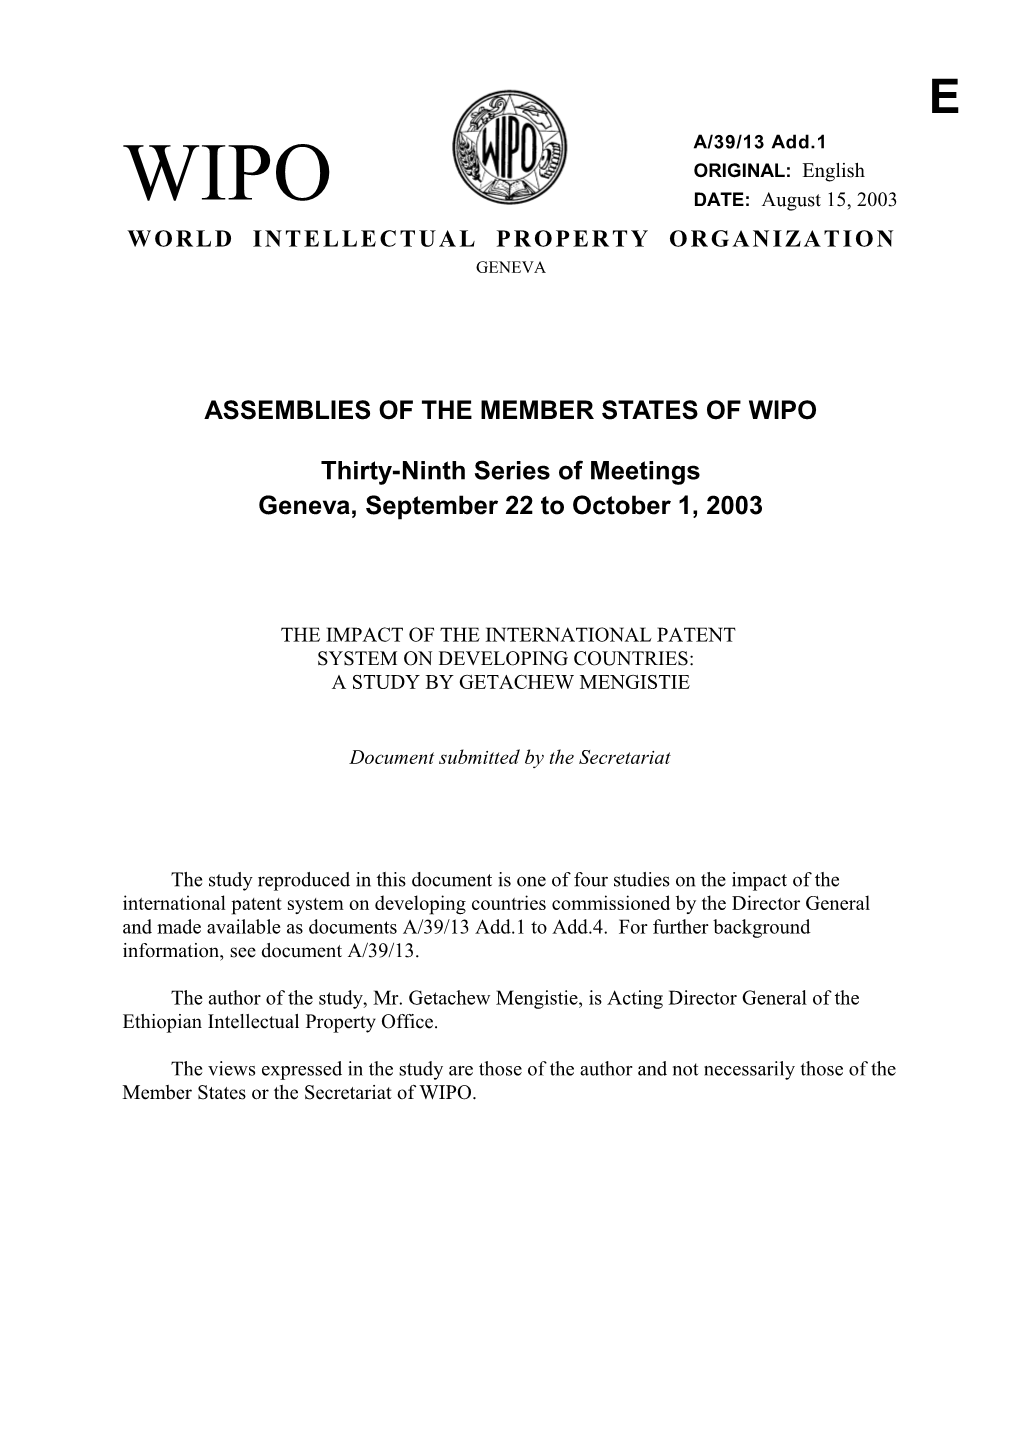 A/39/13 ADD.1: the Impact of the International Patent System on Developing Countries: A